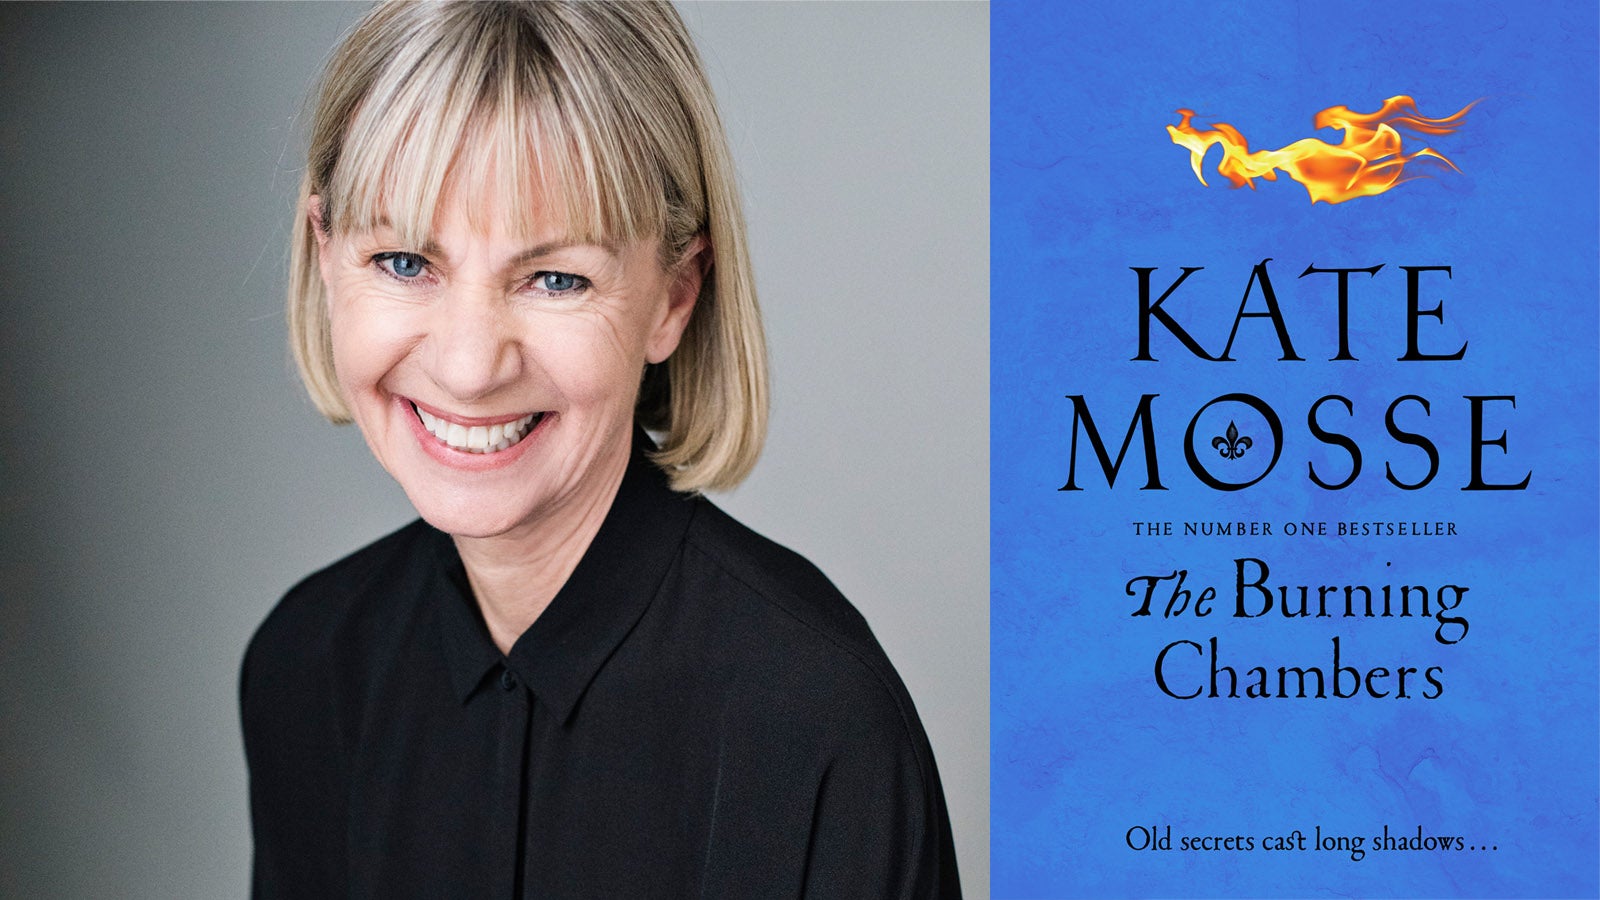 The Burning Chambers by Kate Mosse book cover and author photo